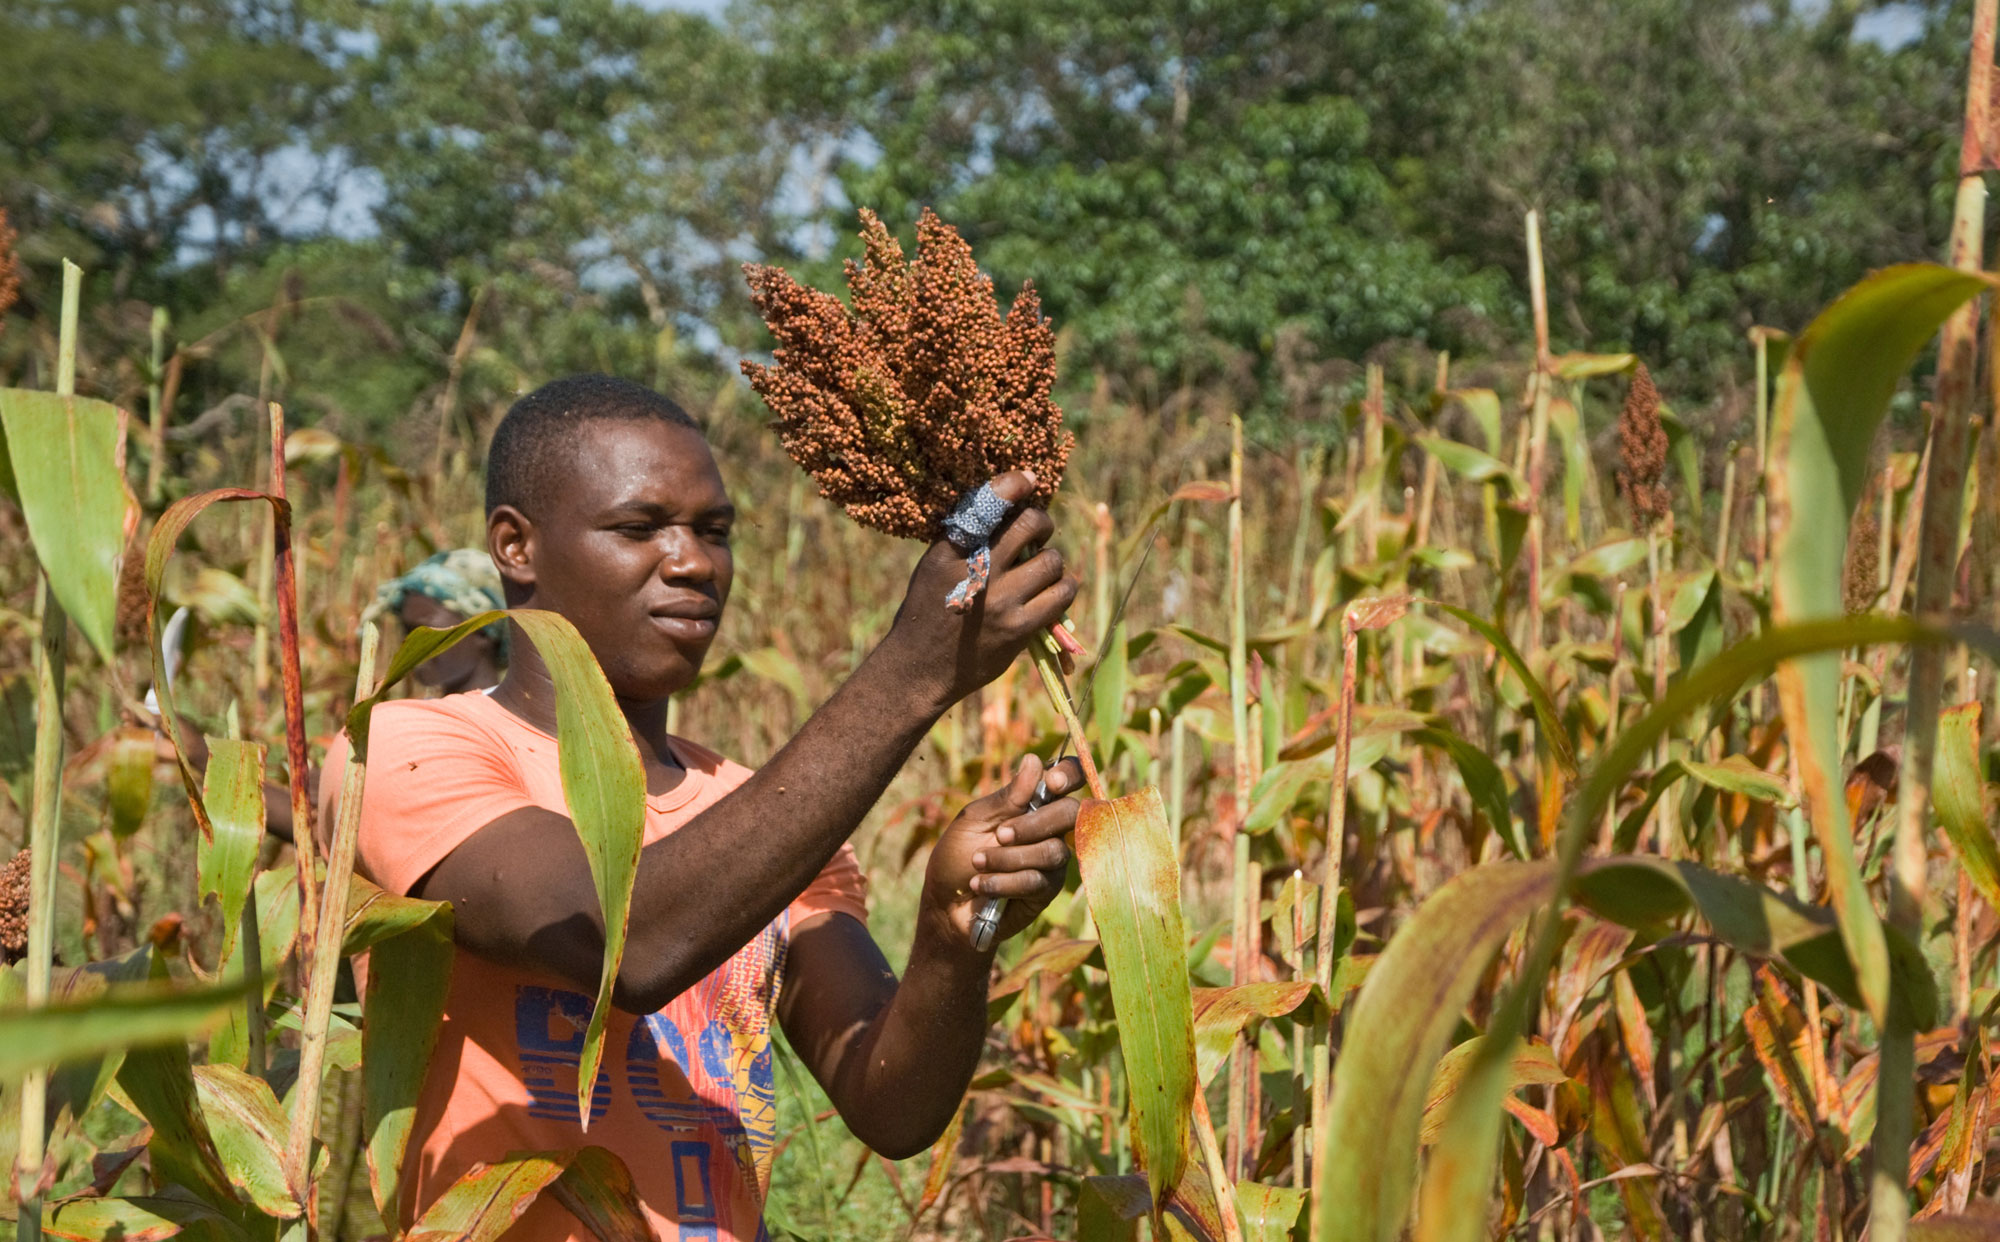 Photograph of a man harvesting sorghum in Burkina Faso. The photo shows a man standing in a field of sorghum. Most of the sorghum in the image has already had its grains removed. The man is using what appears to be a sickle to cut off a head of sorghum, which he is holding in one hand. 